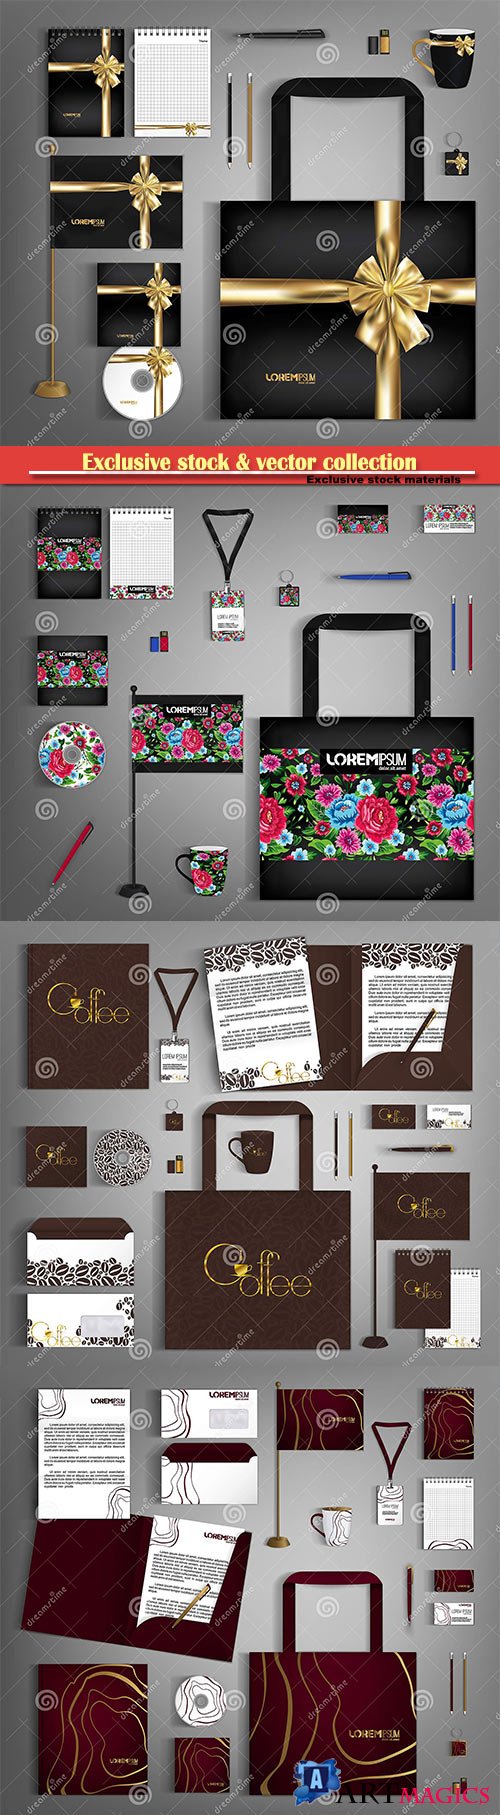 Corporate identity template design, modern abstract business set stationery